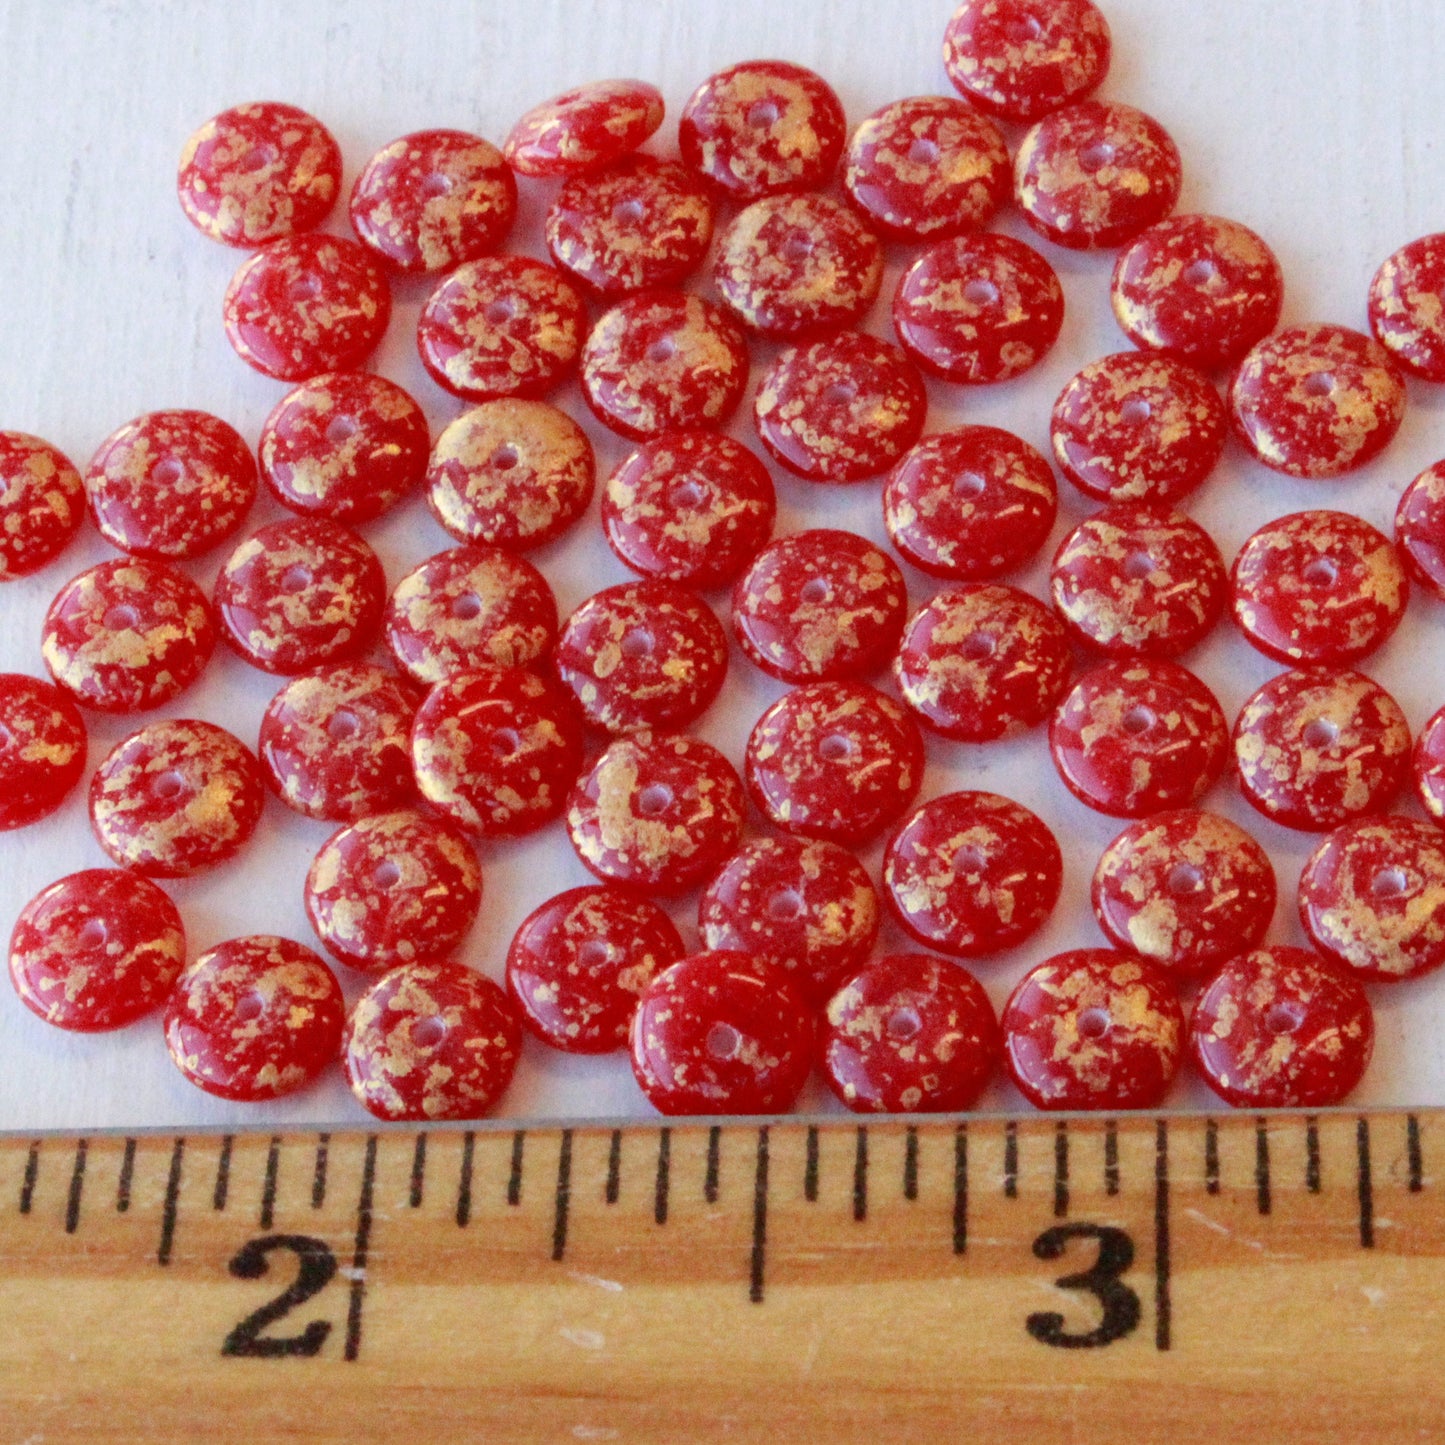 Load image into Gallery viewer, 6mm Rondelle Beads - Red With Gold Dust - 50 Beads
